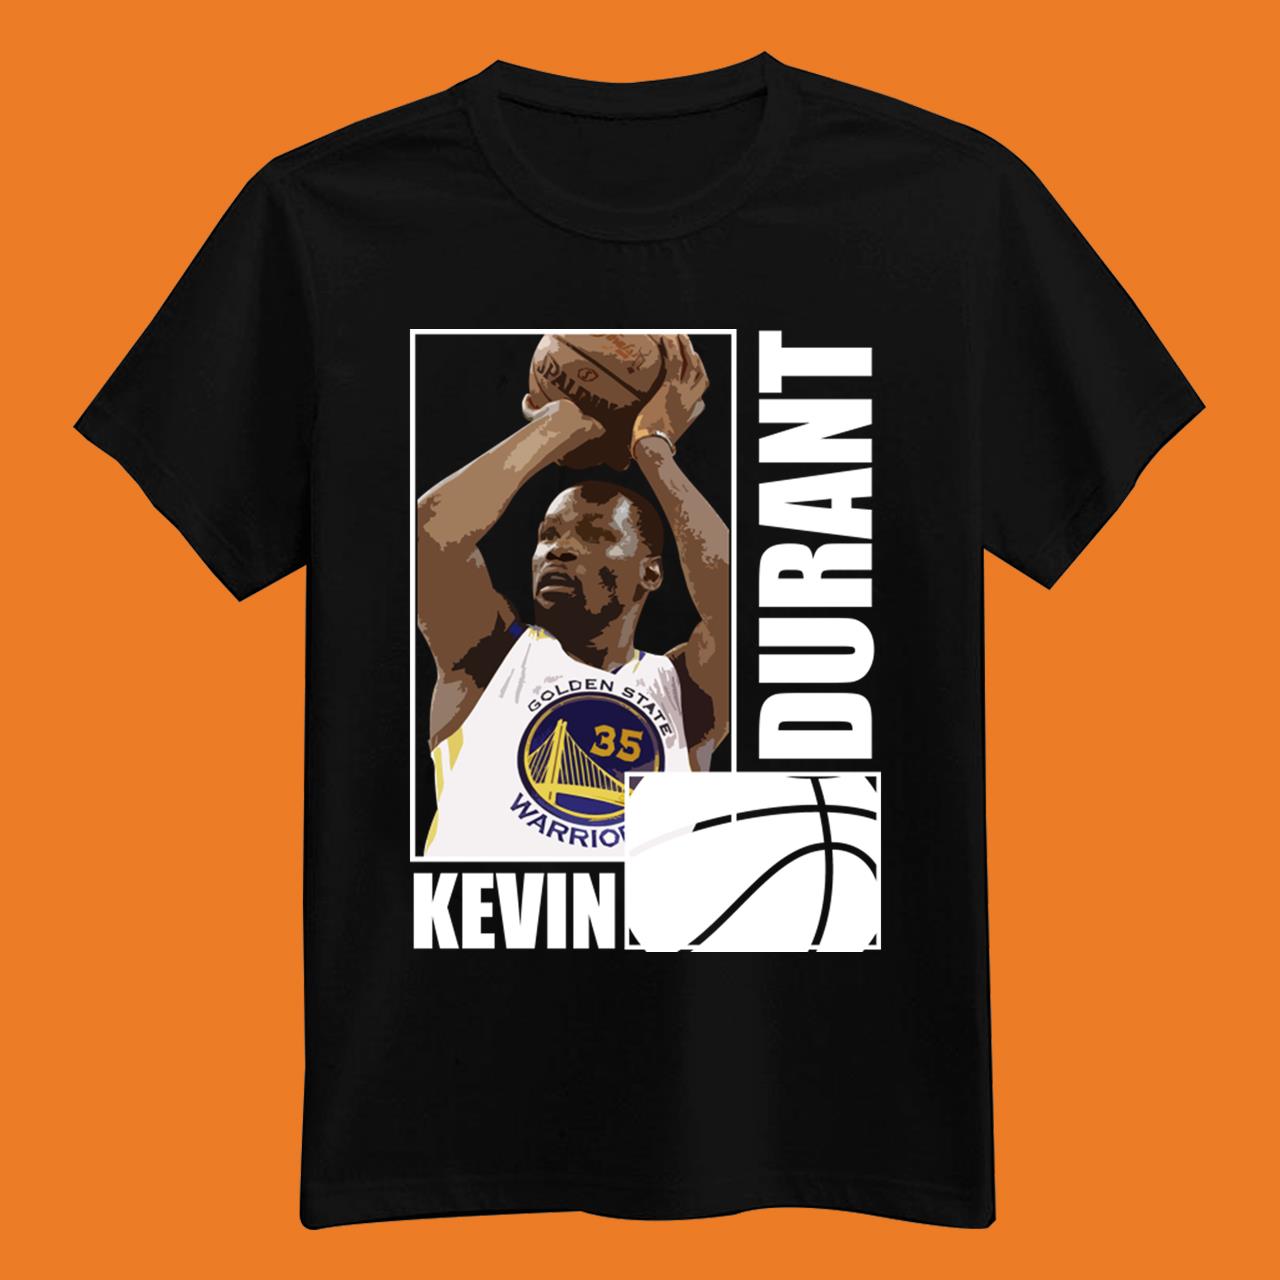 Kevin Durant Classic T-Shirt